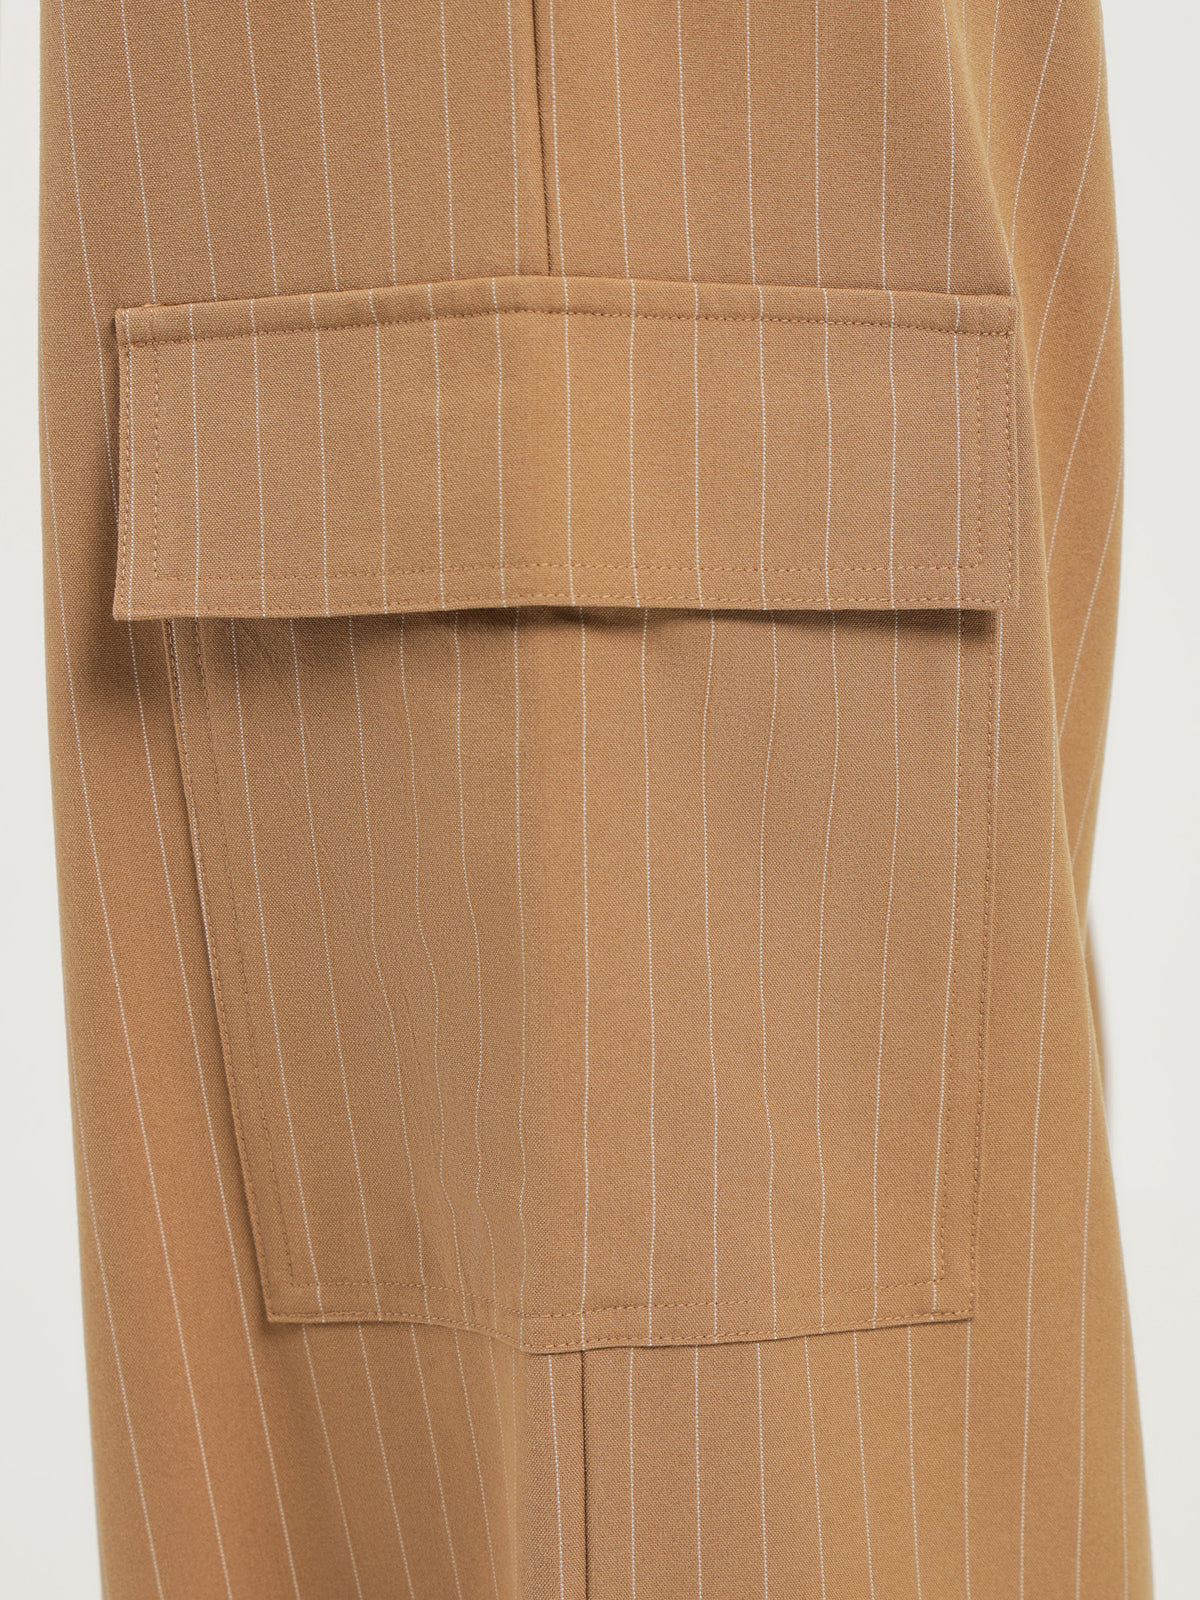 Outlaw Drawstring Cargo Pants in Sand Brown Pinstripe